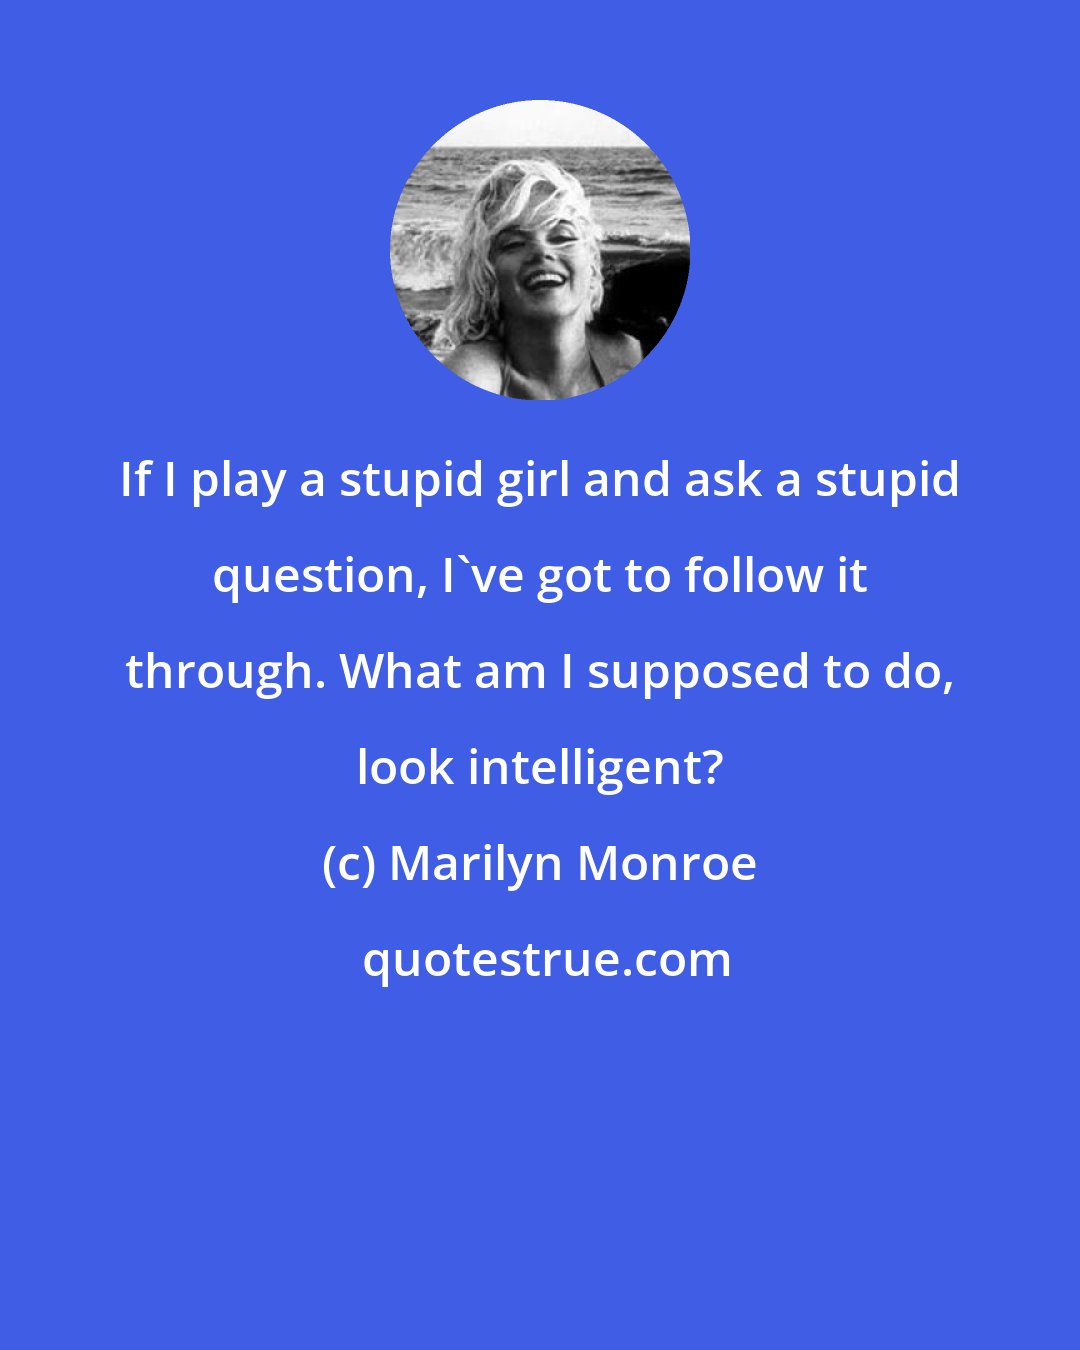 Marilyn Monroe: If I play a stupid girl and ask a stupid question, I've got to follow it through. What am I supposed to do, look intelligent?